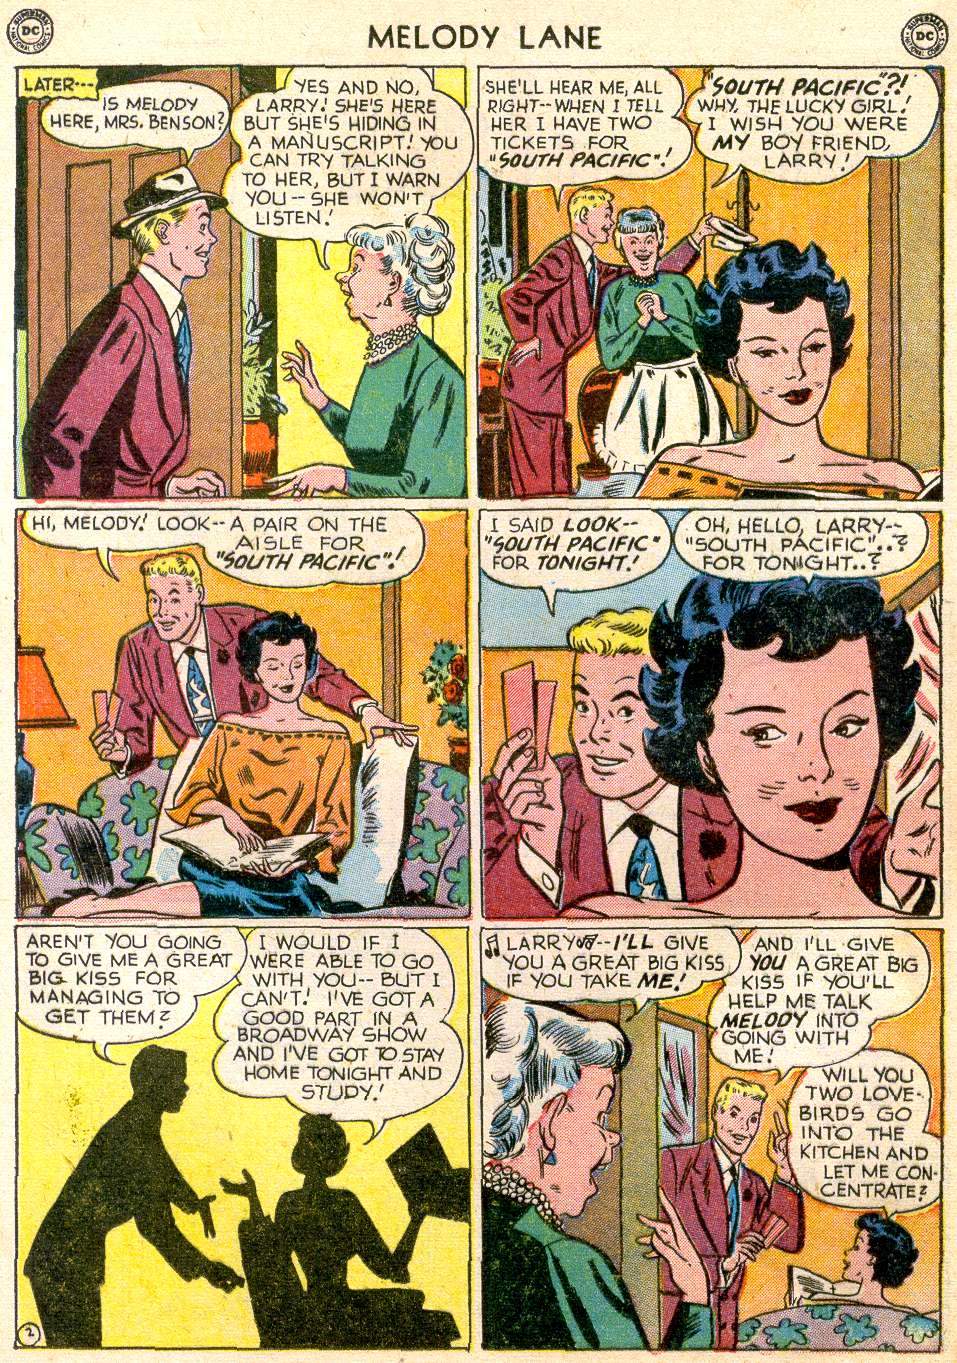 Read online Miss Melody Lane of Broadway comic -  Issue #3 - 16